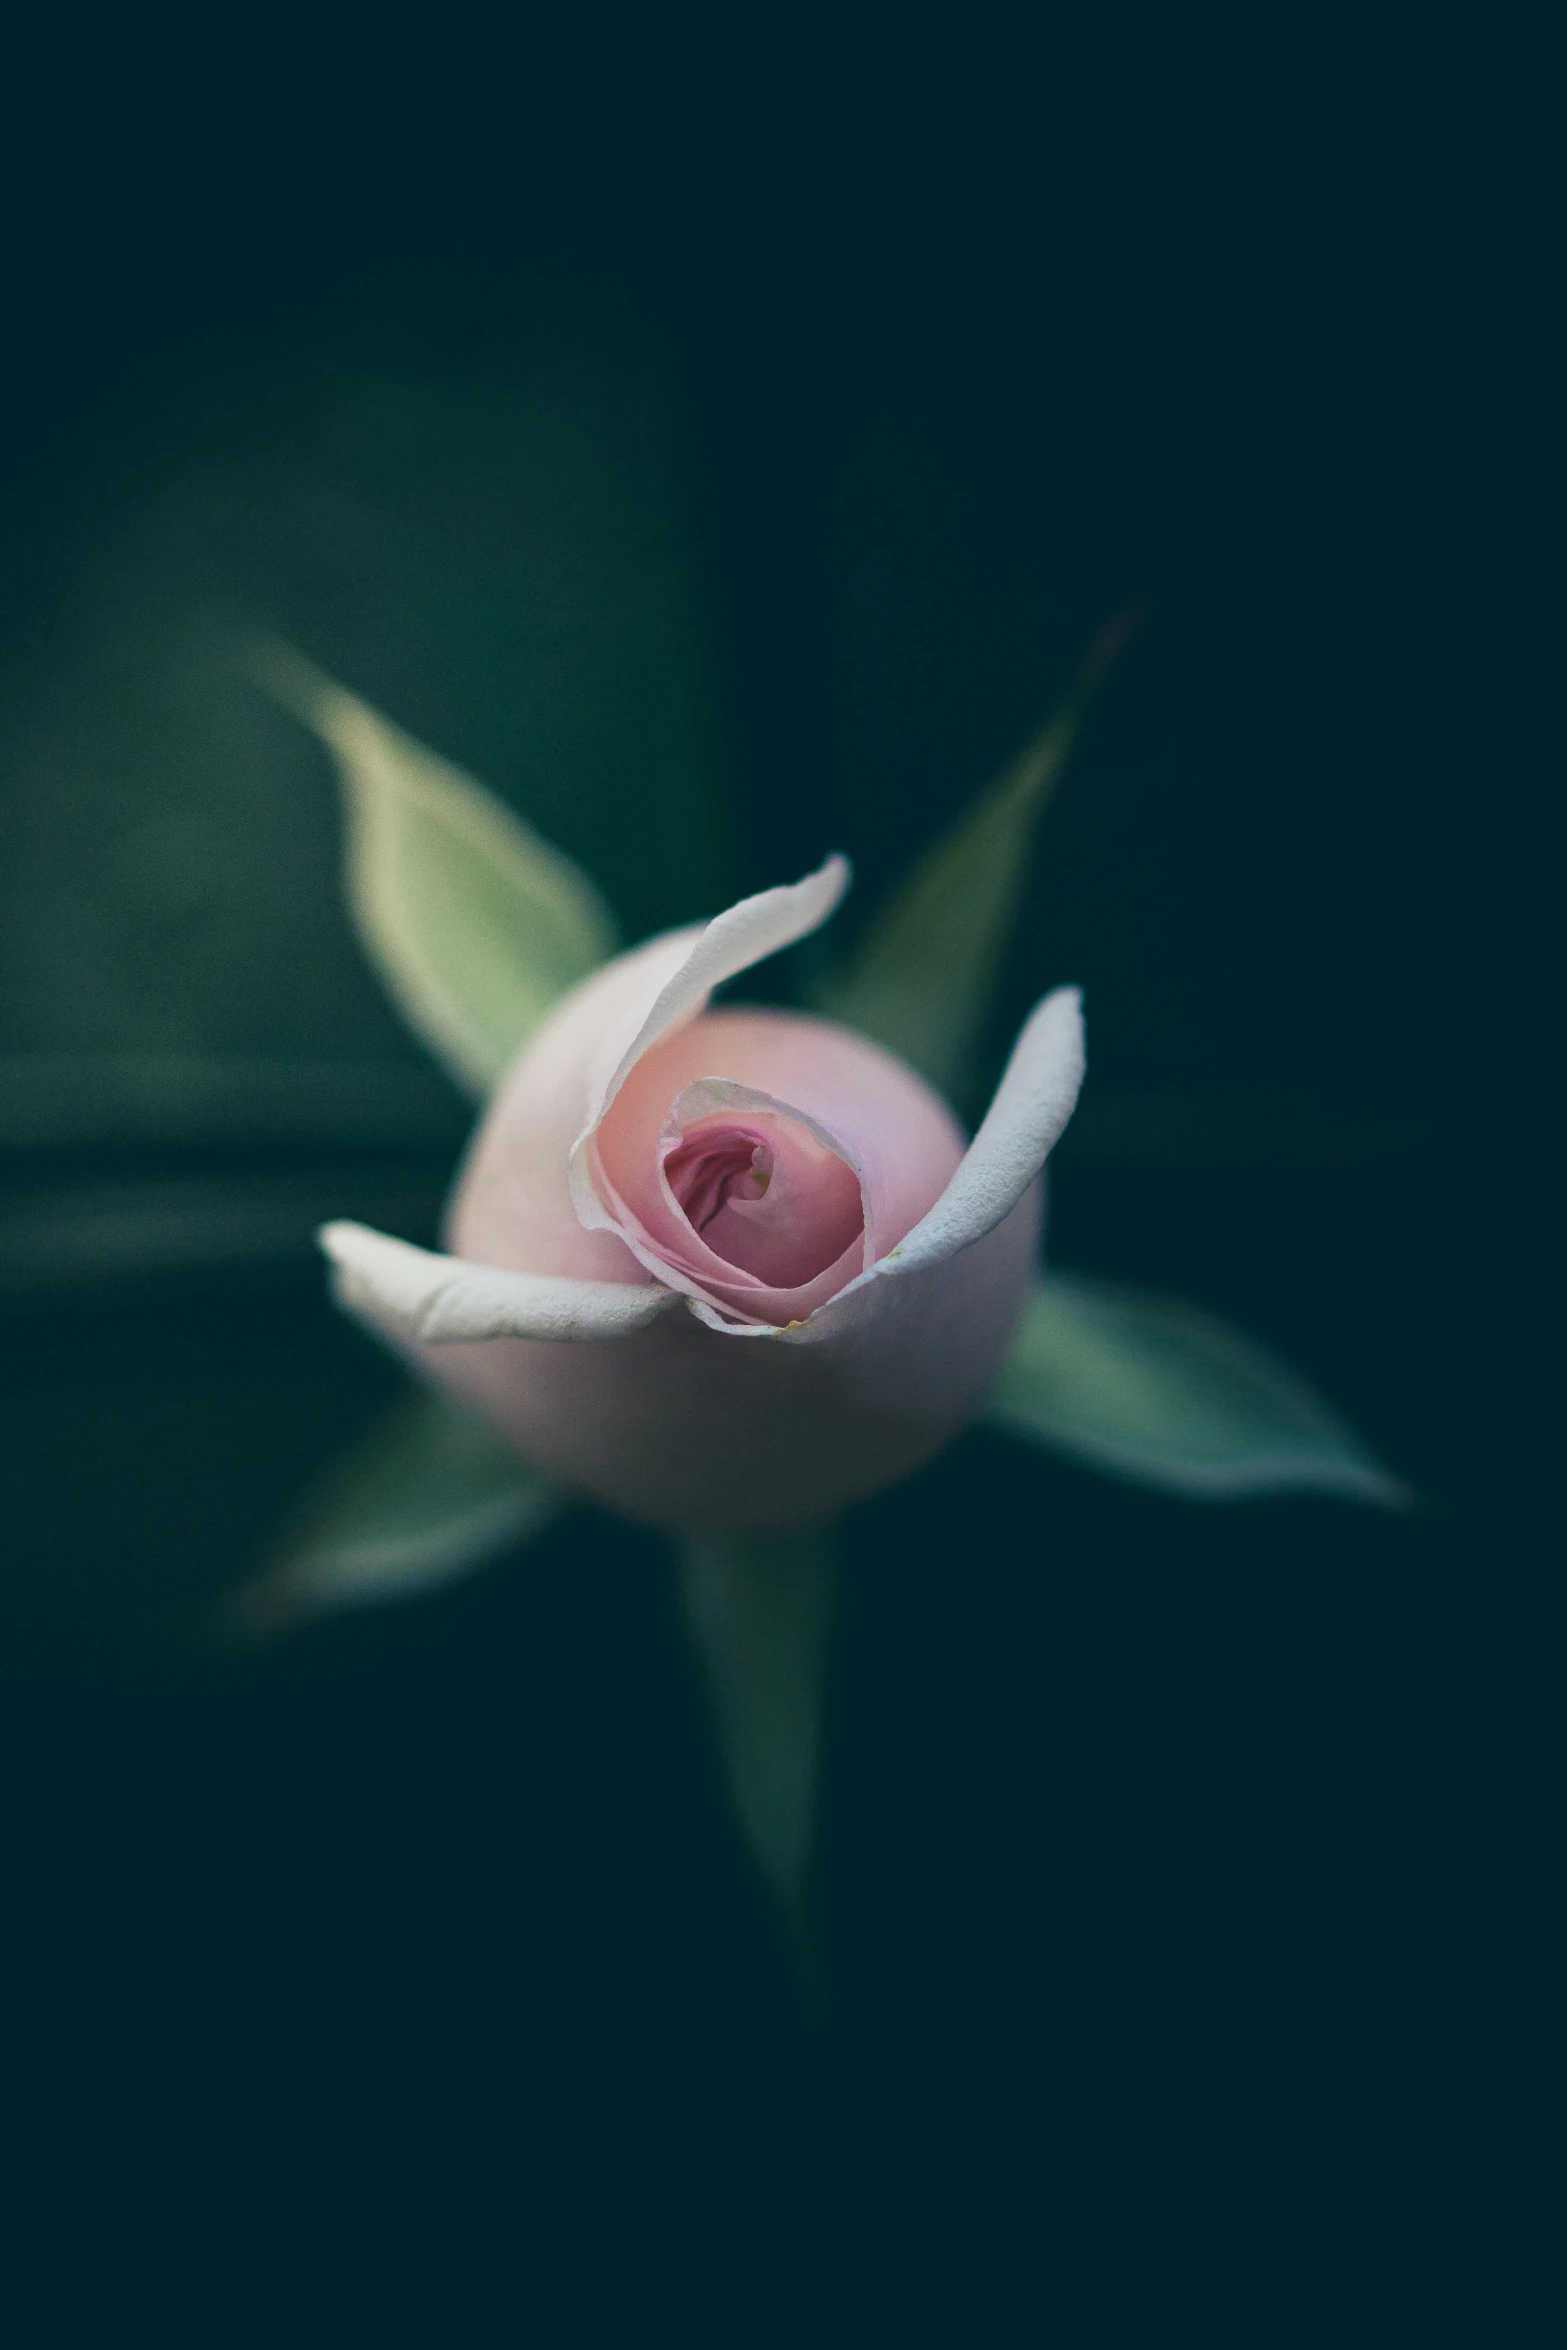 a single pink rose on a dark background, a macro photograph, unsplash, in the jungle. bloom, paul barson, curled perspective, alessio albi